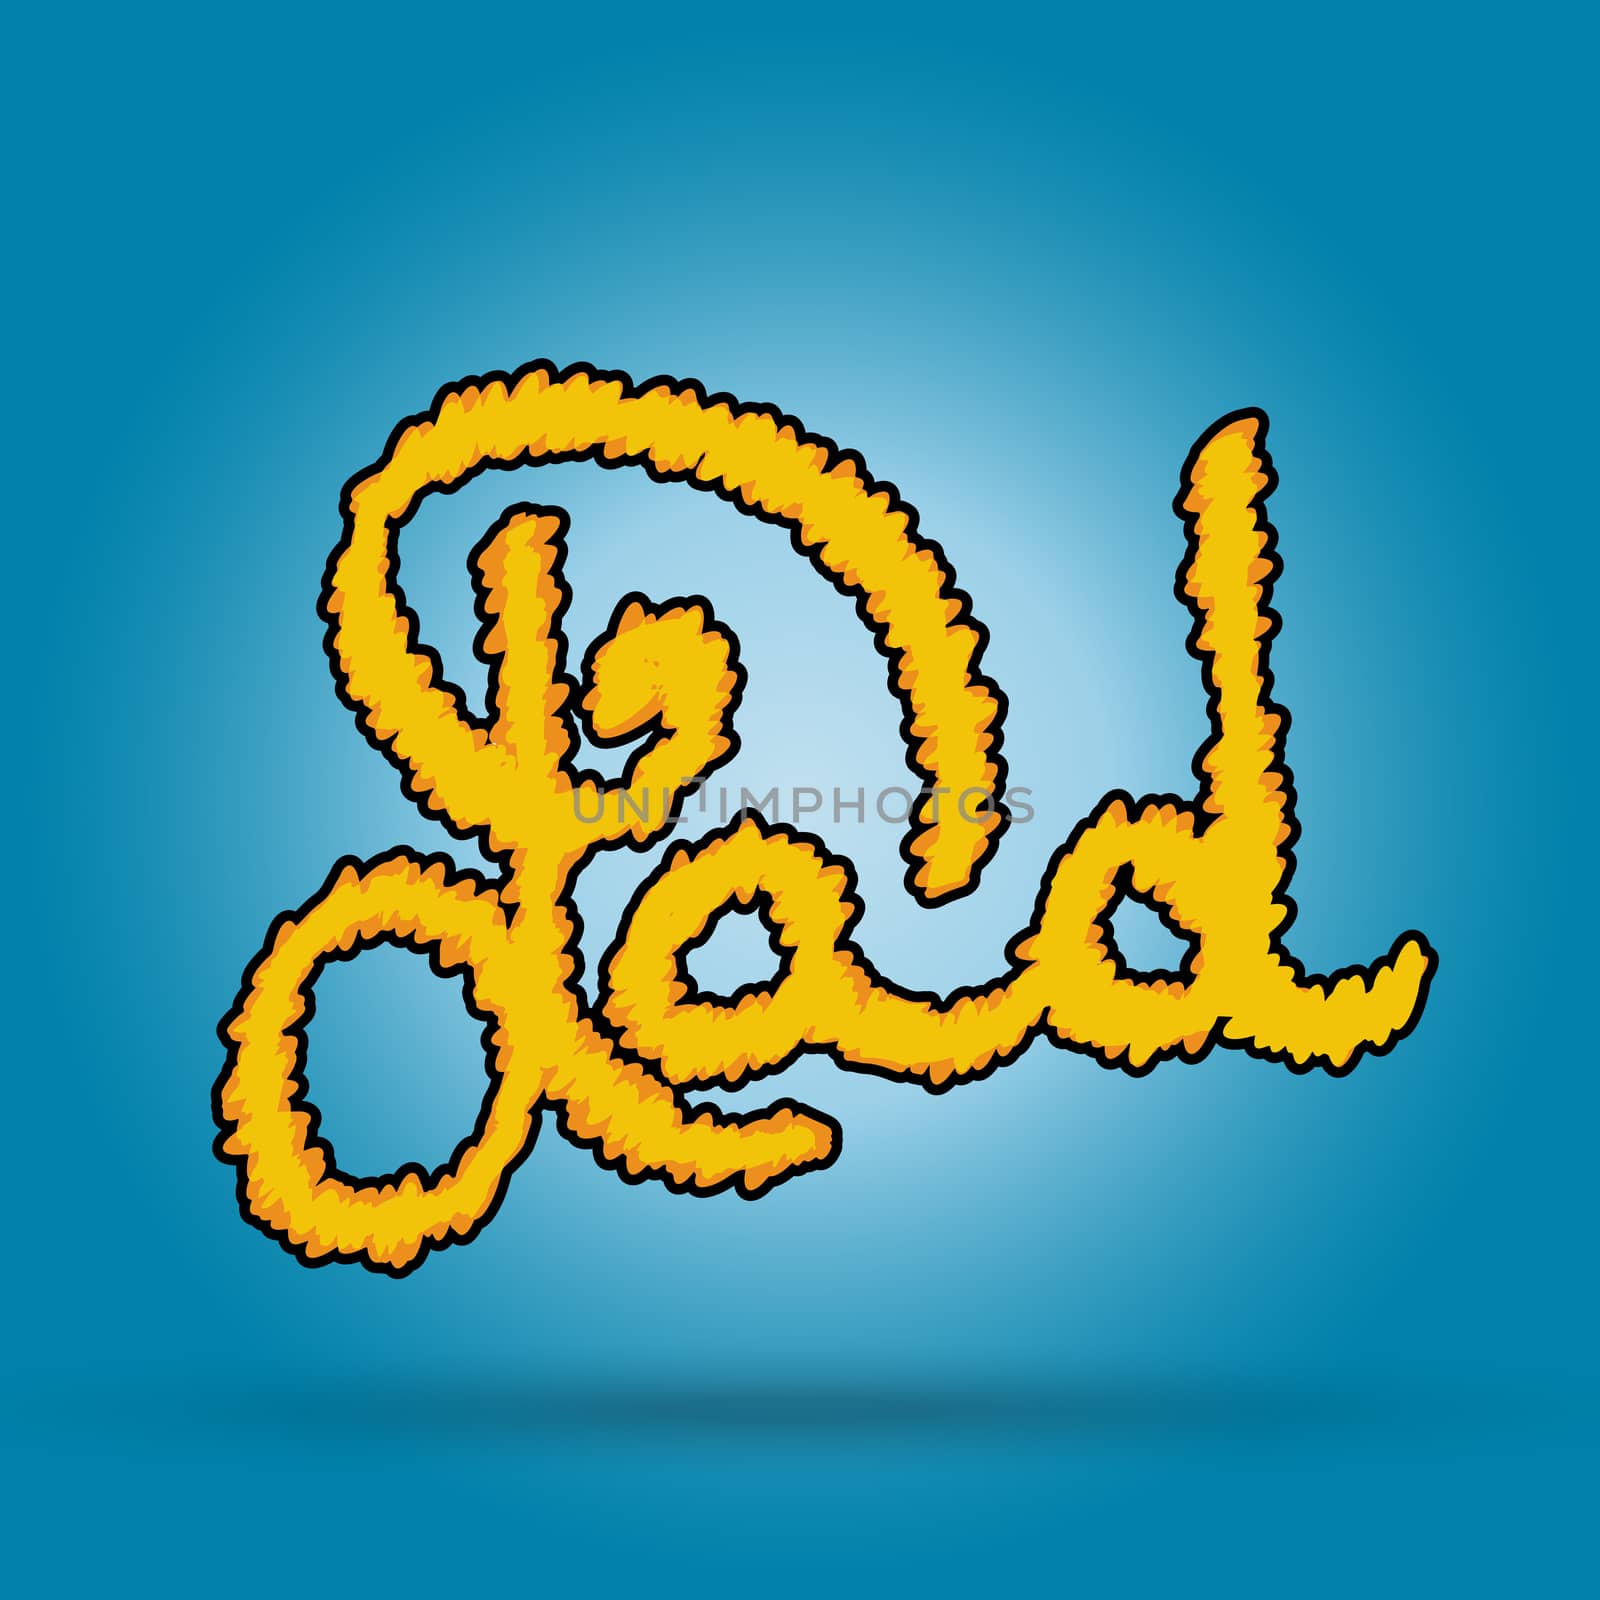 dad lettering greeting card. Happy Fathers Day illustration .